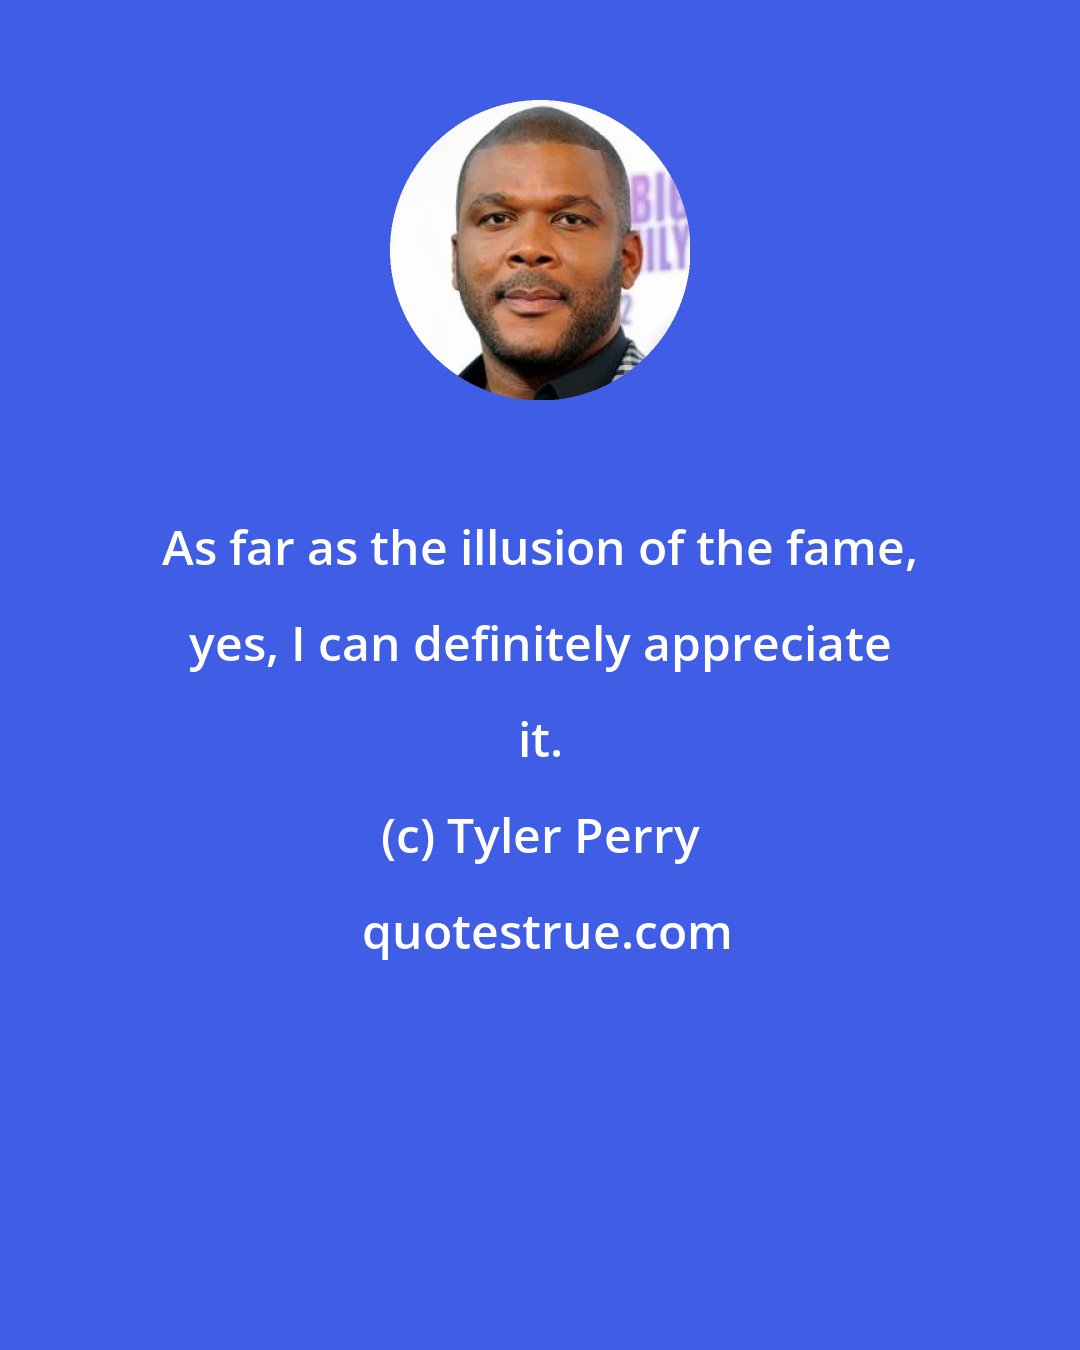 Tyler Perry: As far as the illusion of the fame, yes, I can definitely appreciate it.